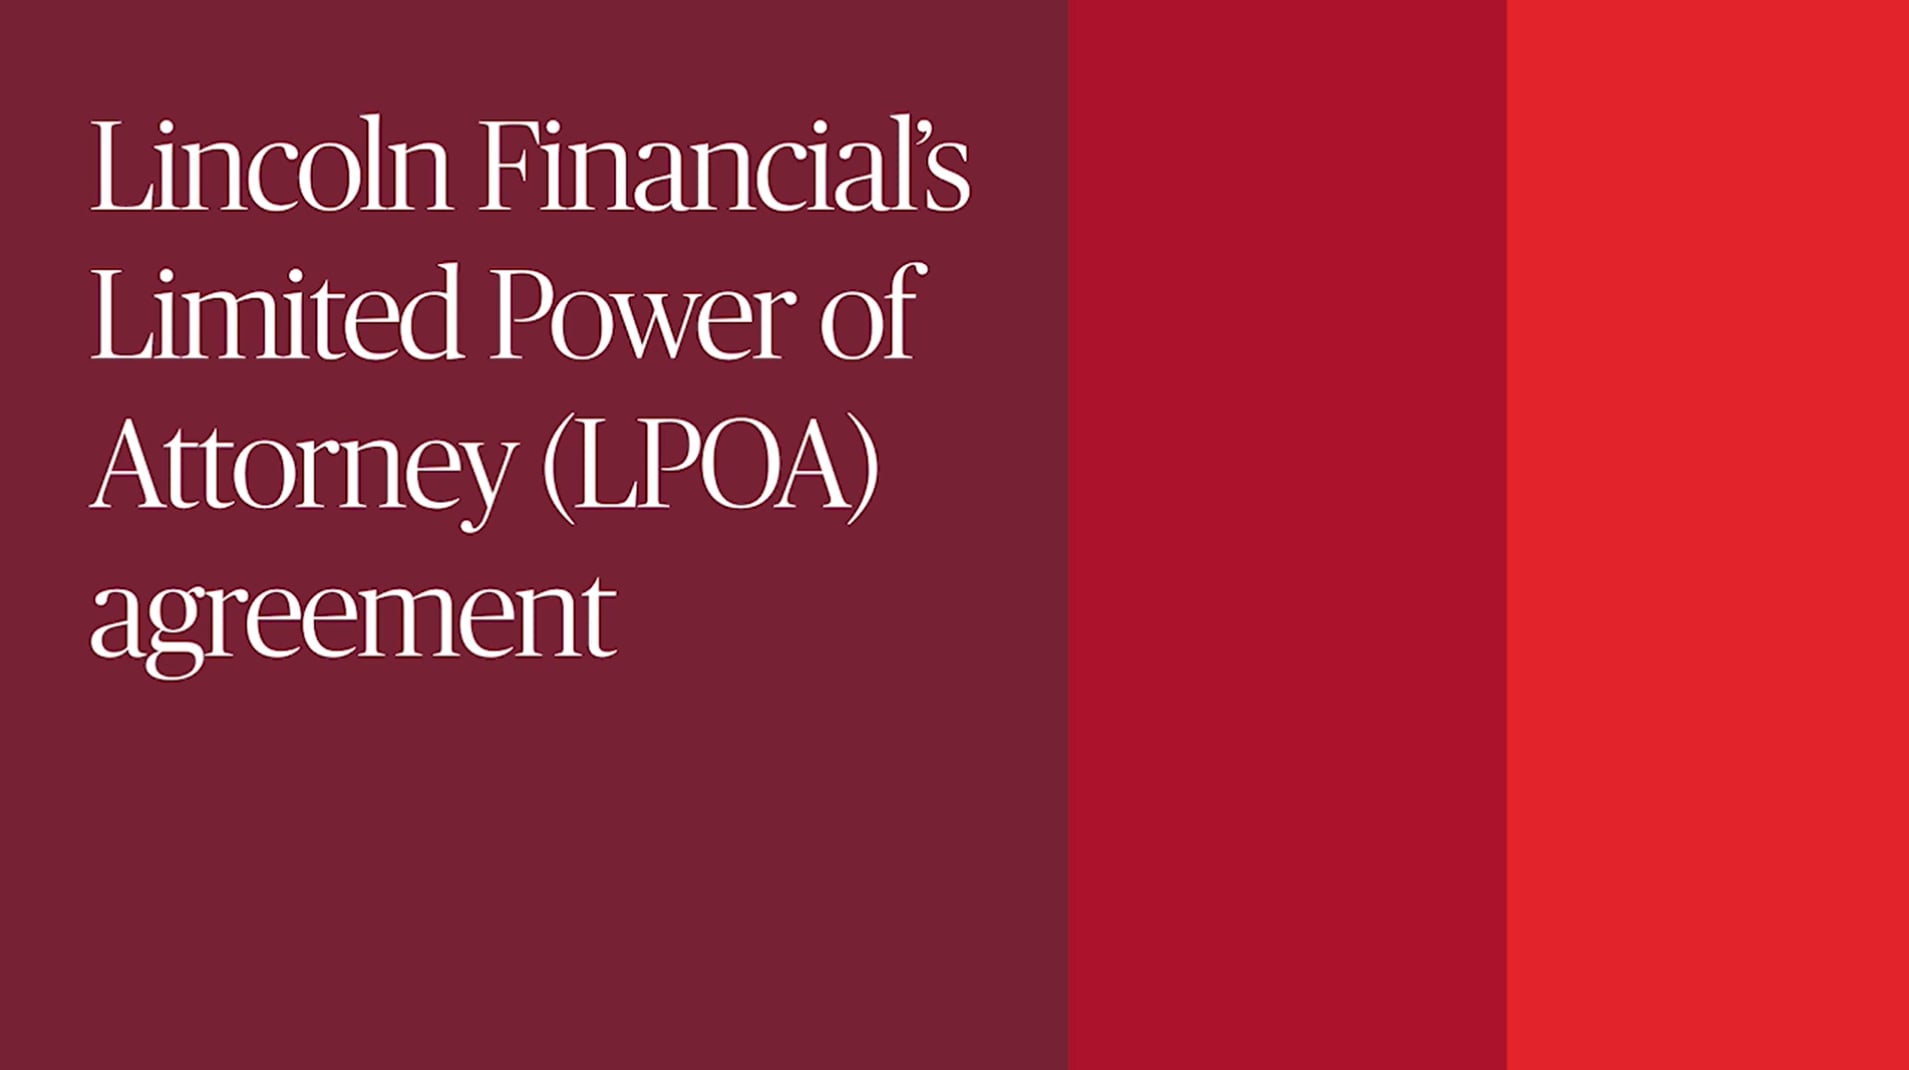 Lincoln Financial's Limited Power of Attorney agreement